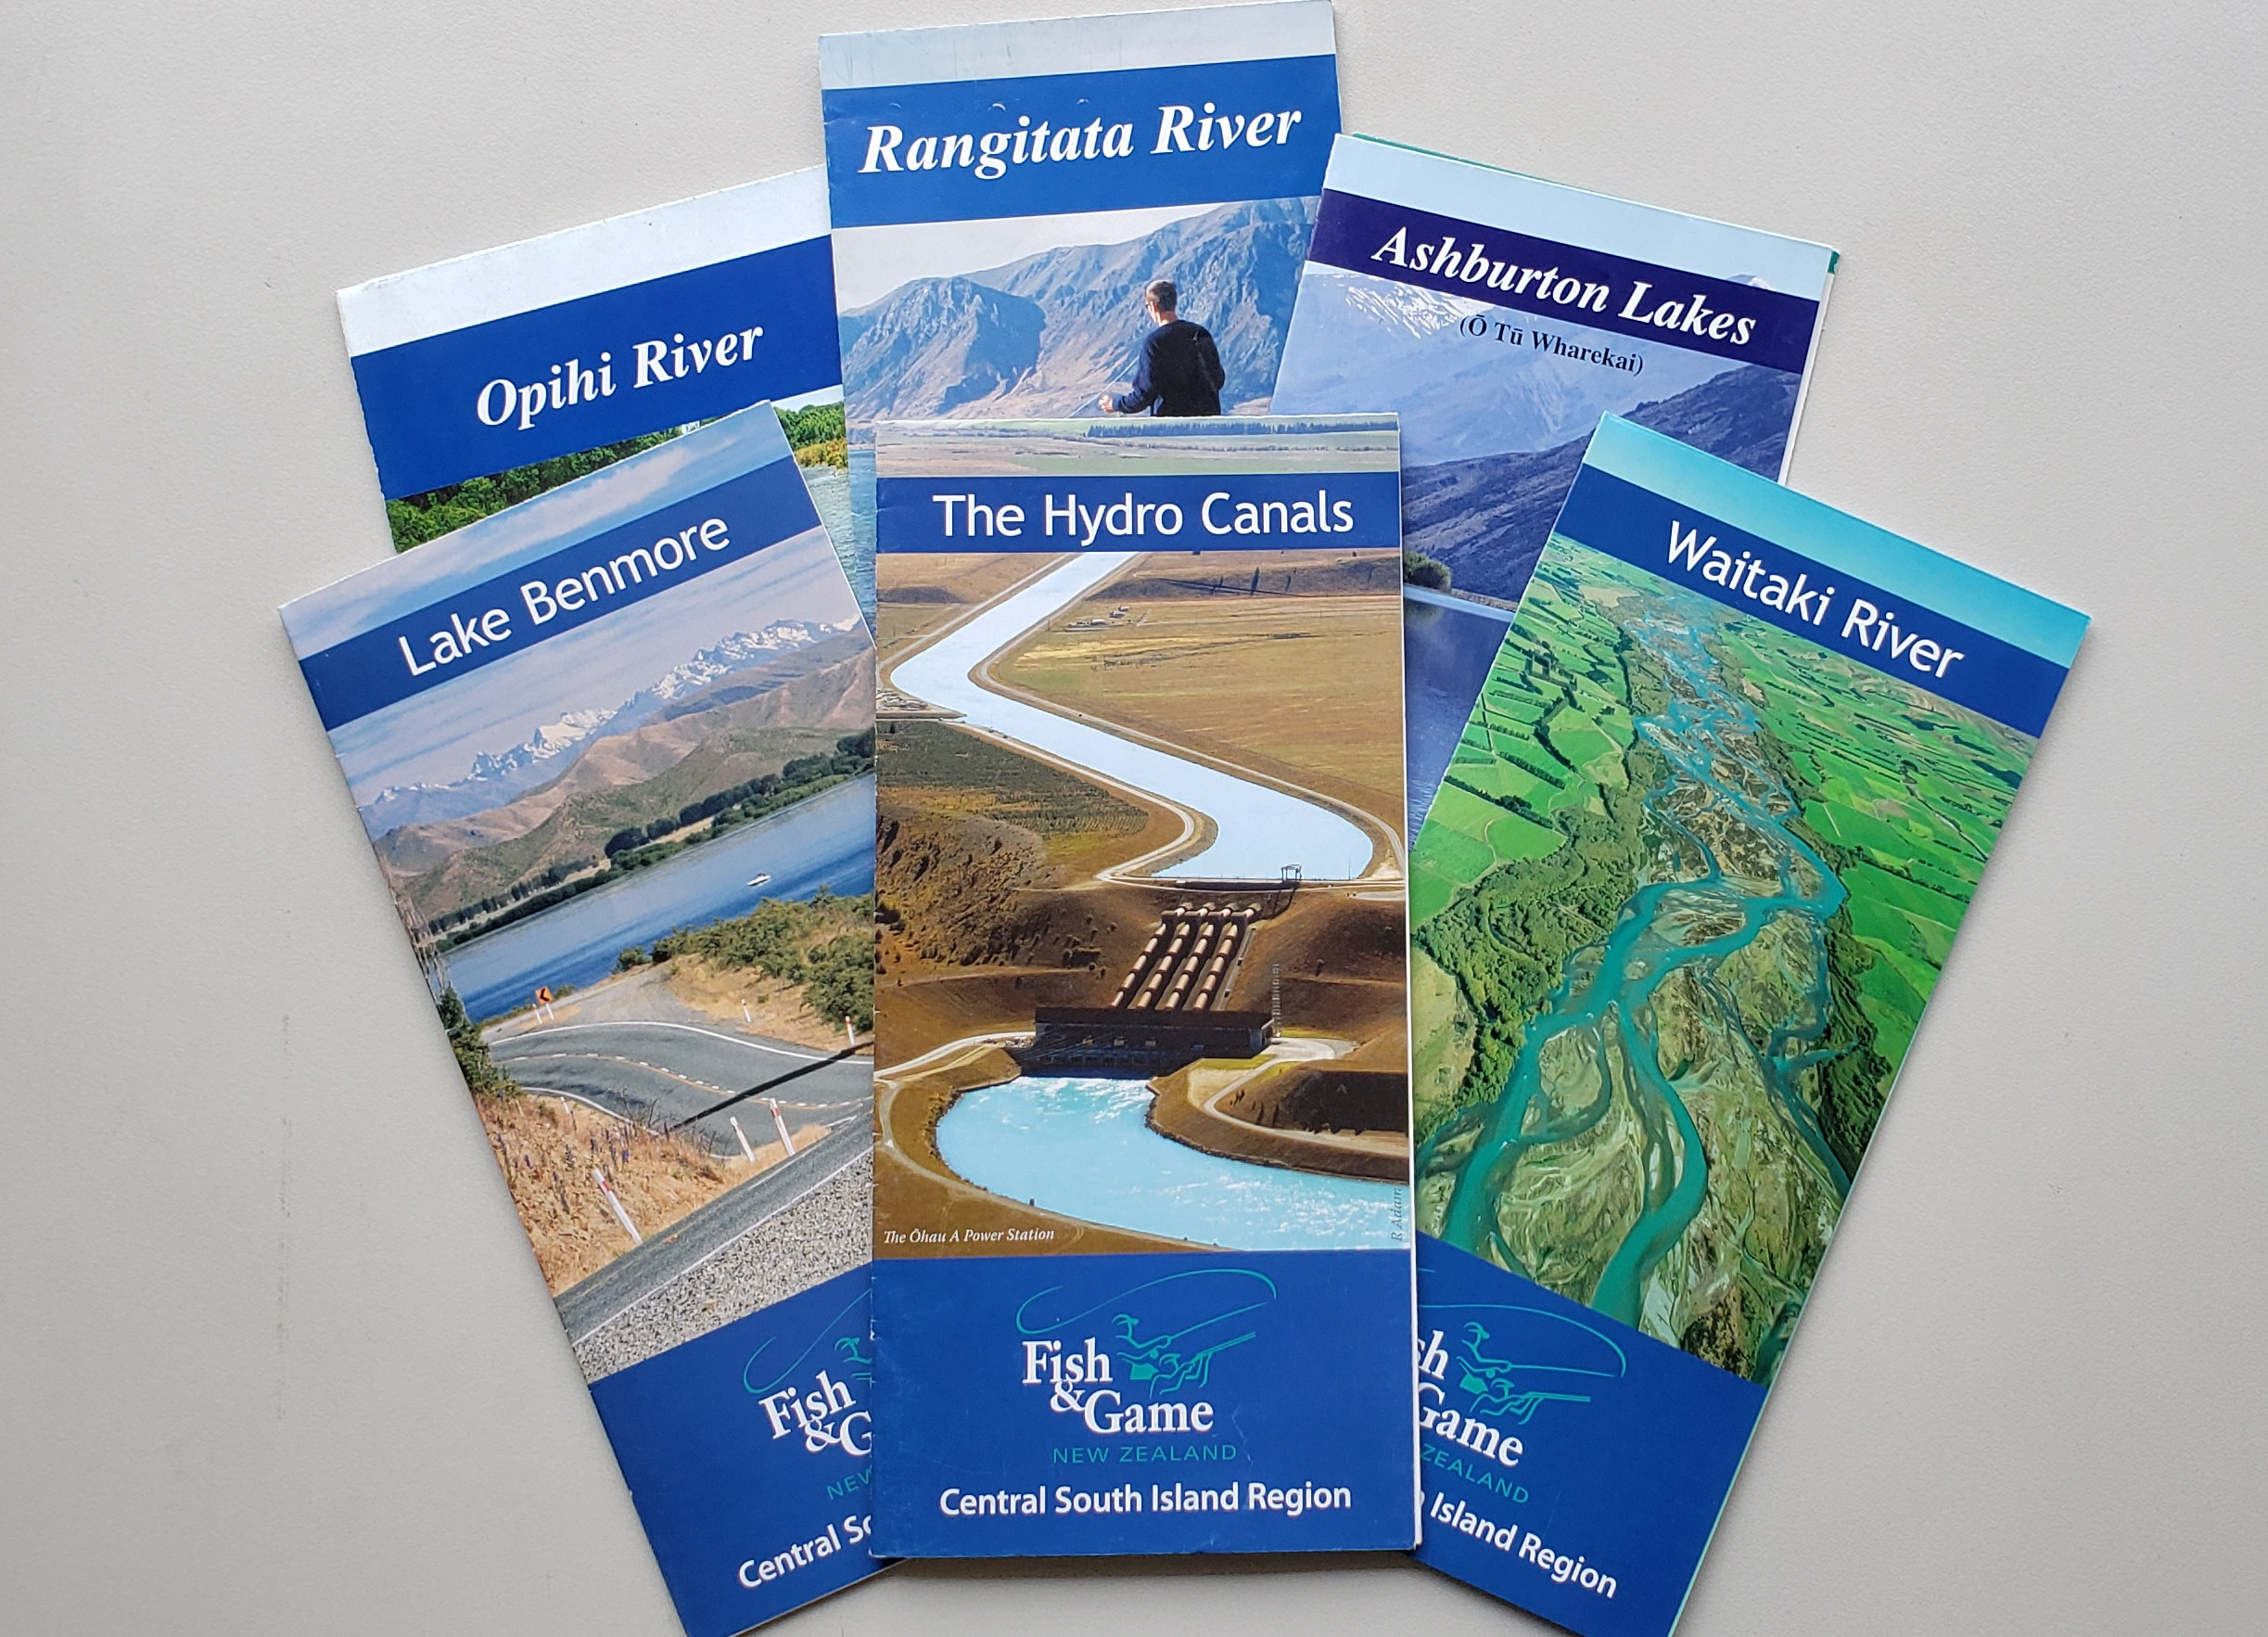 RL dec CSI 2 These CSI angler access guides can be found online4